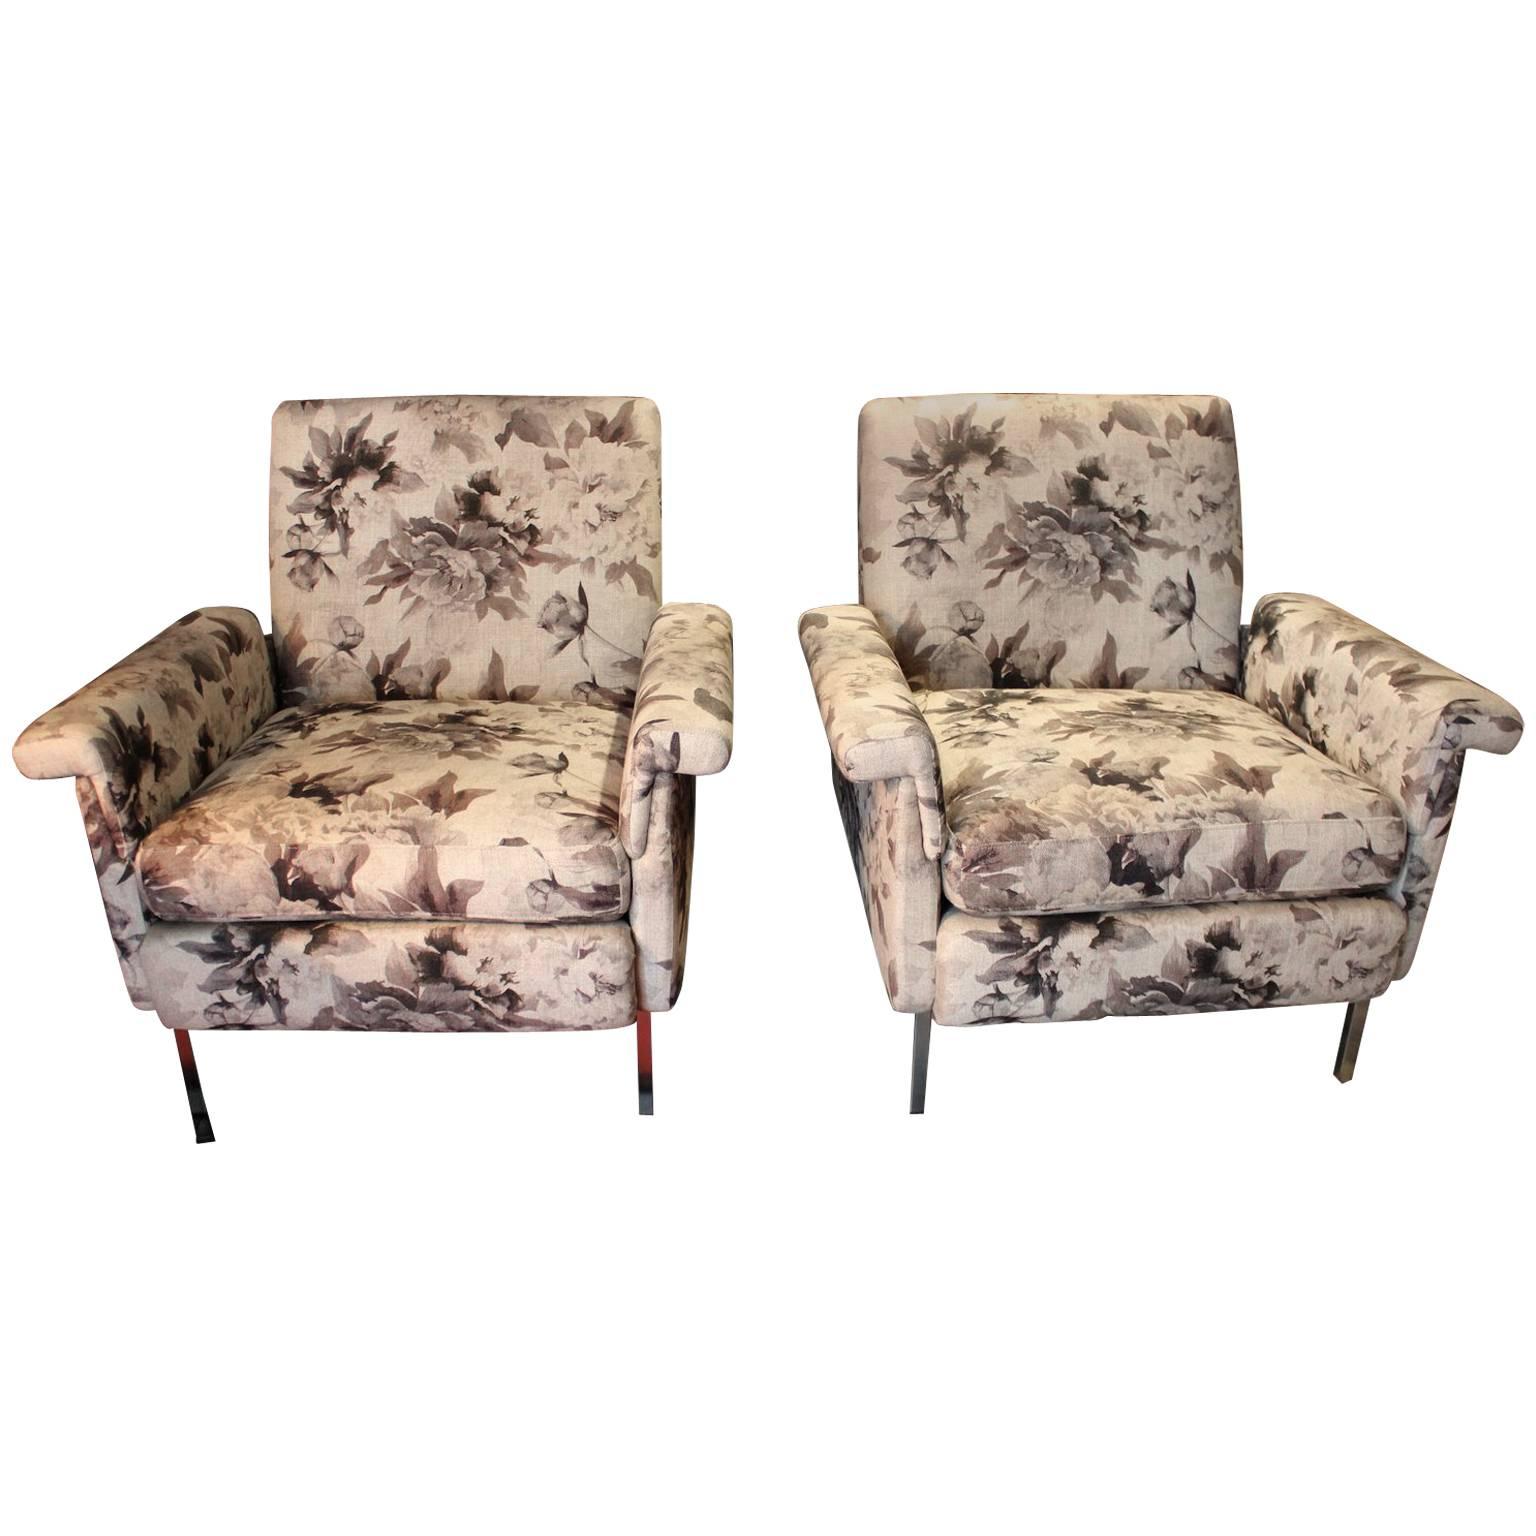 1970 Pair of Armchairs Covered in Floral Print Linen, Metal Base For Sale